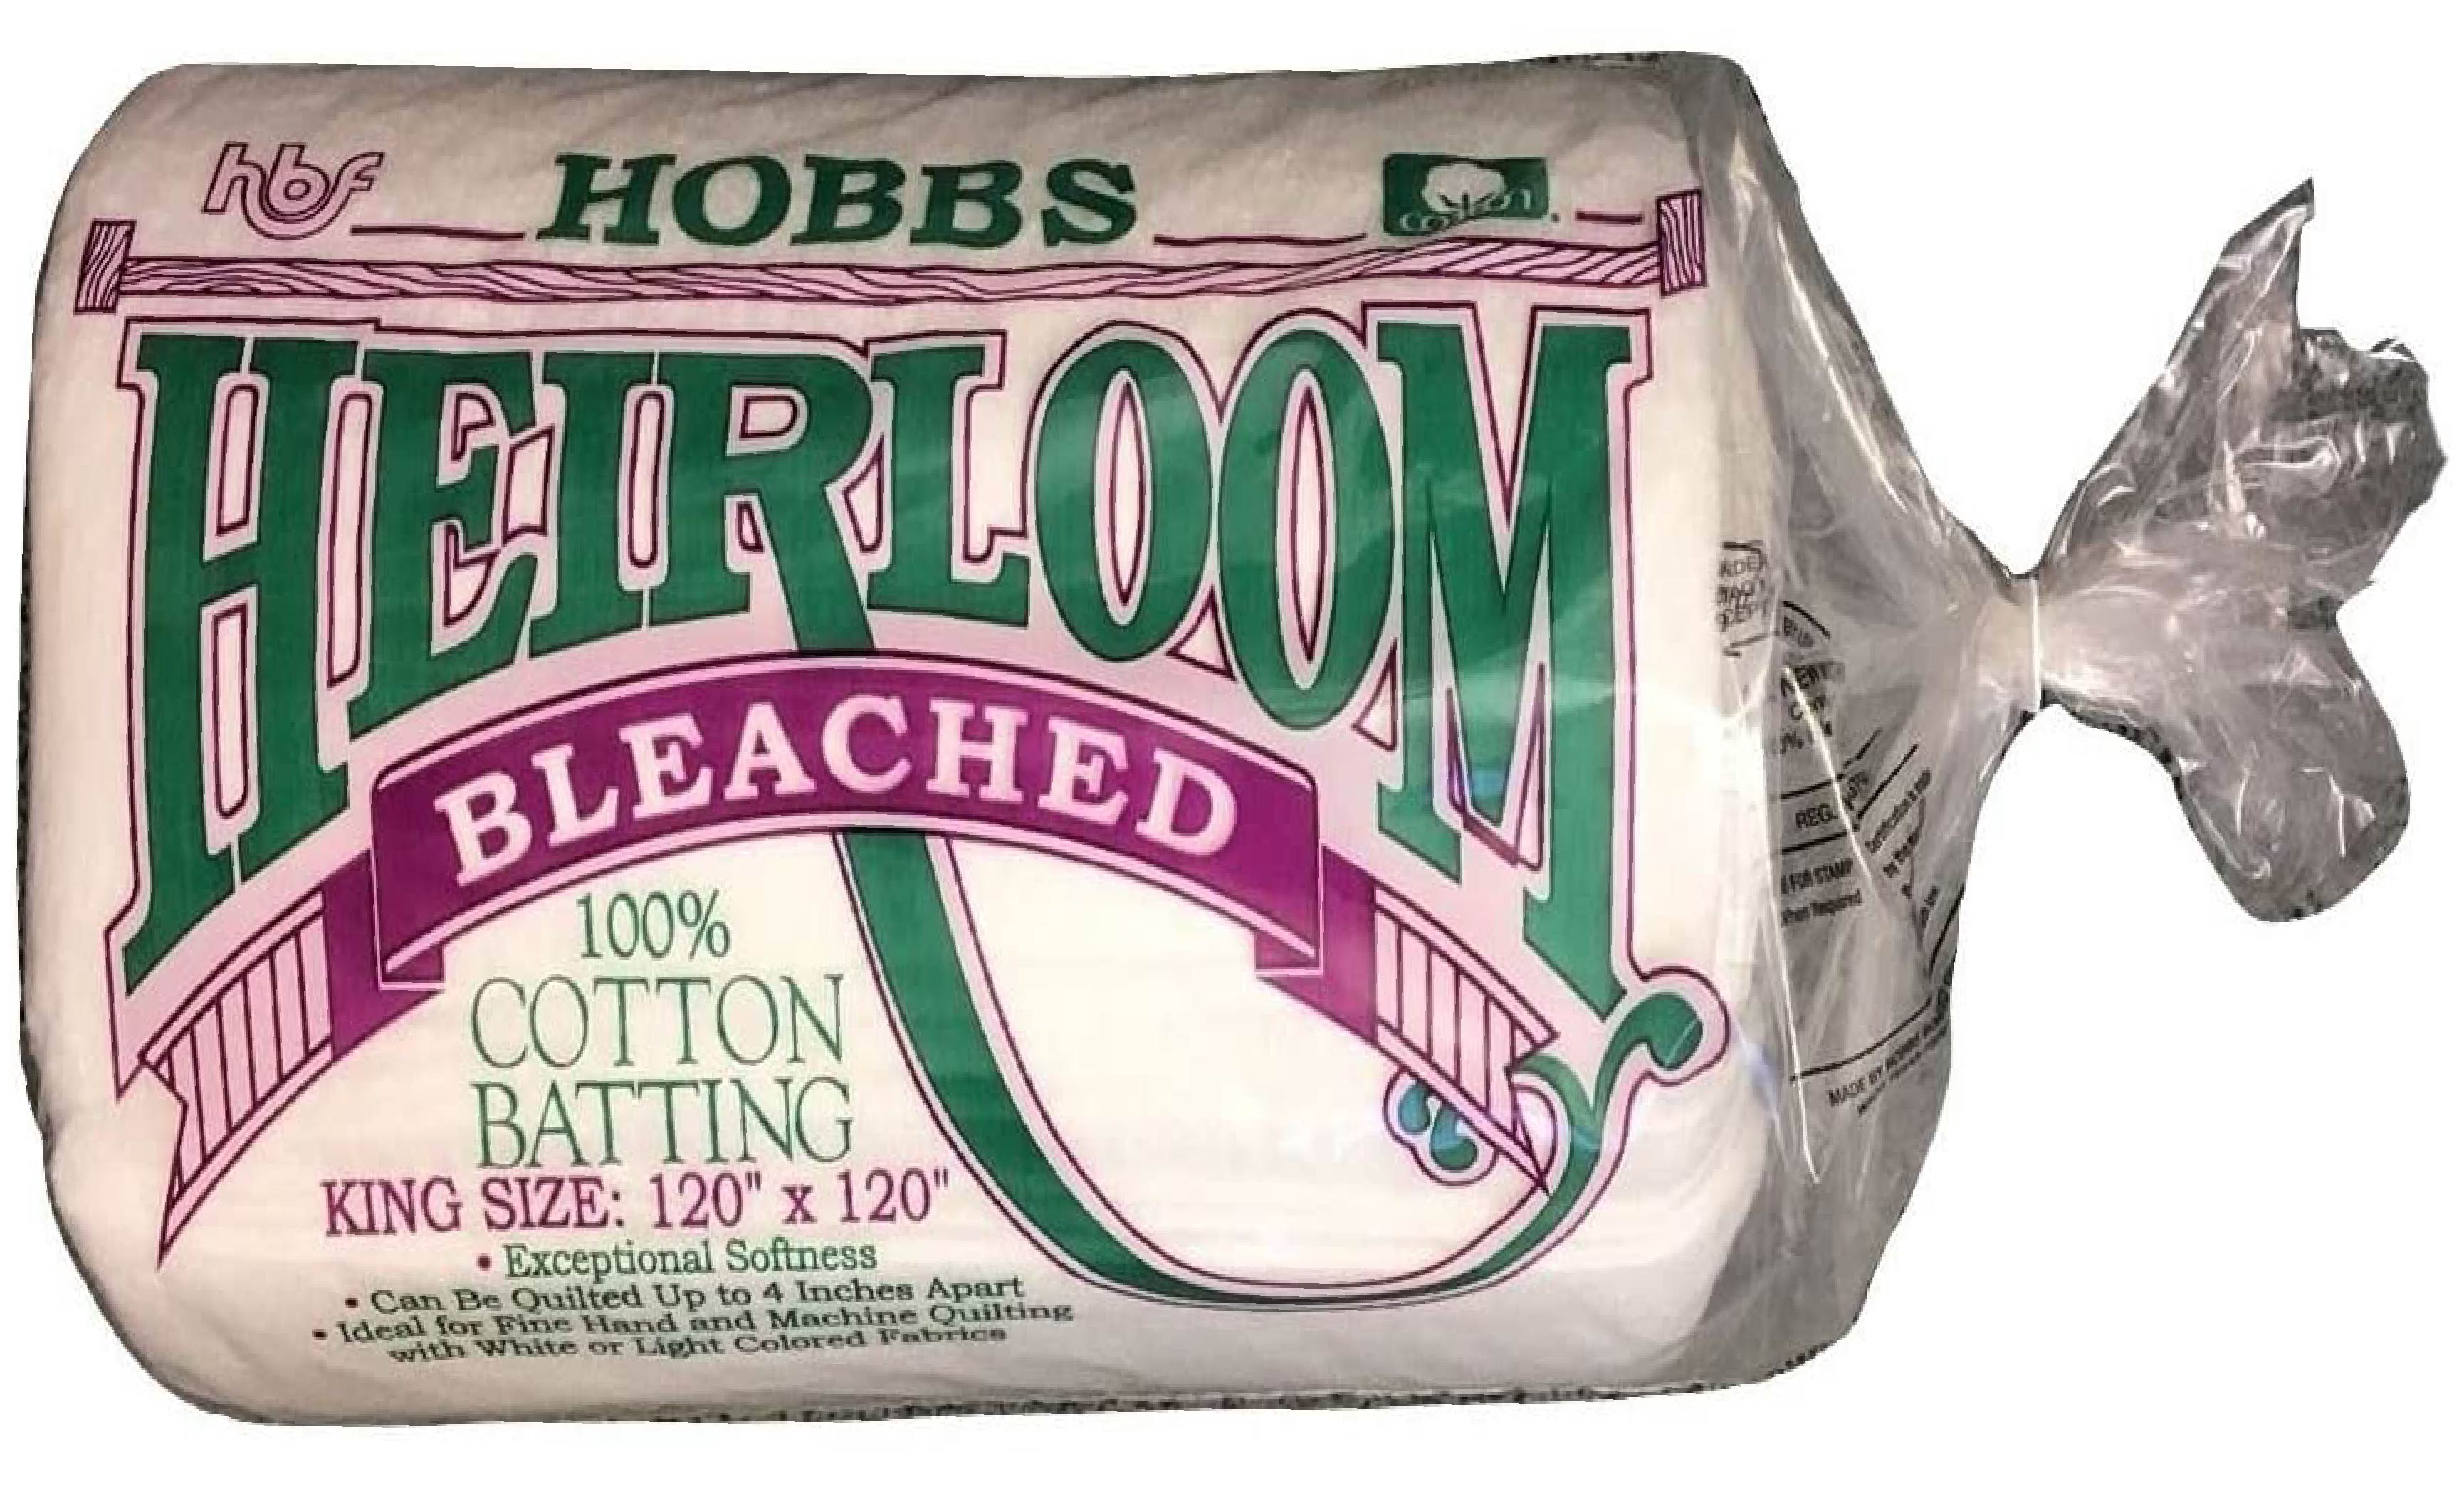 Hobbs Heirloom Bleached 100% Cotton Batting, Various Sizes – Blanks for  Crafters